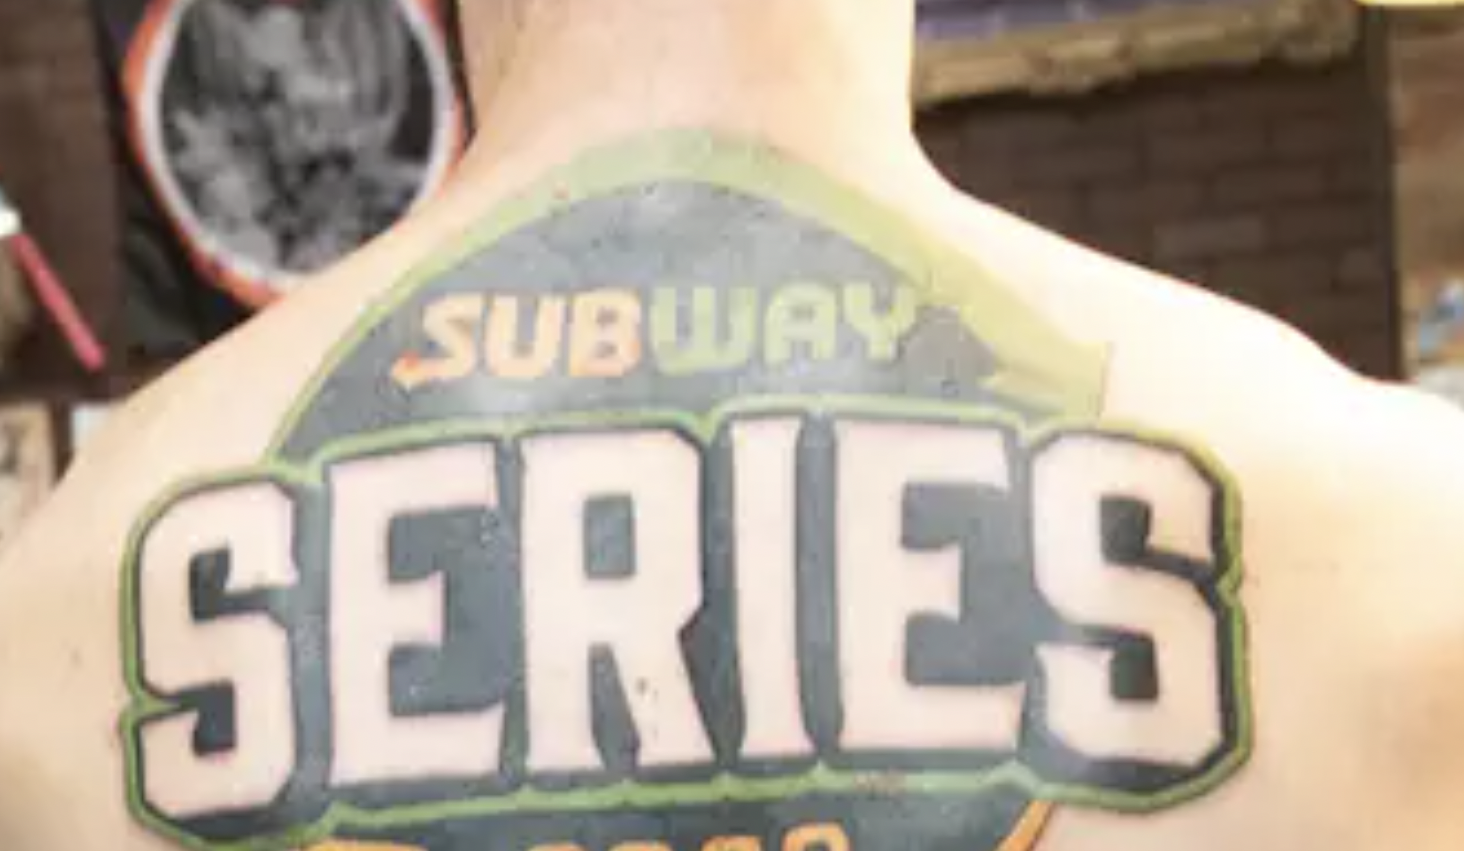 Odds and Ends: Man gets tattoo in exchange for Subway for life and other offbeat offerings